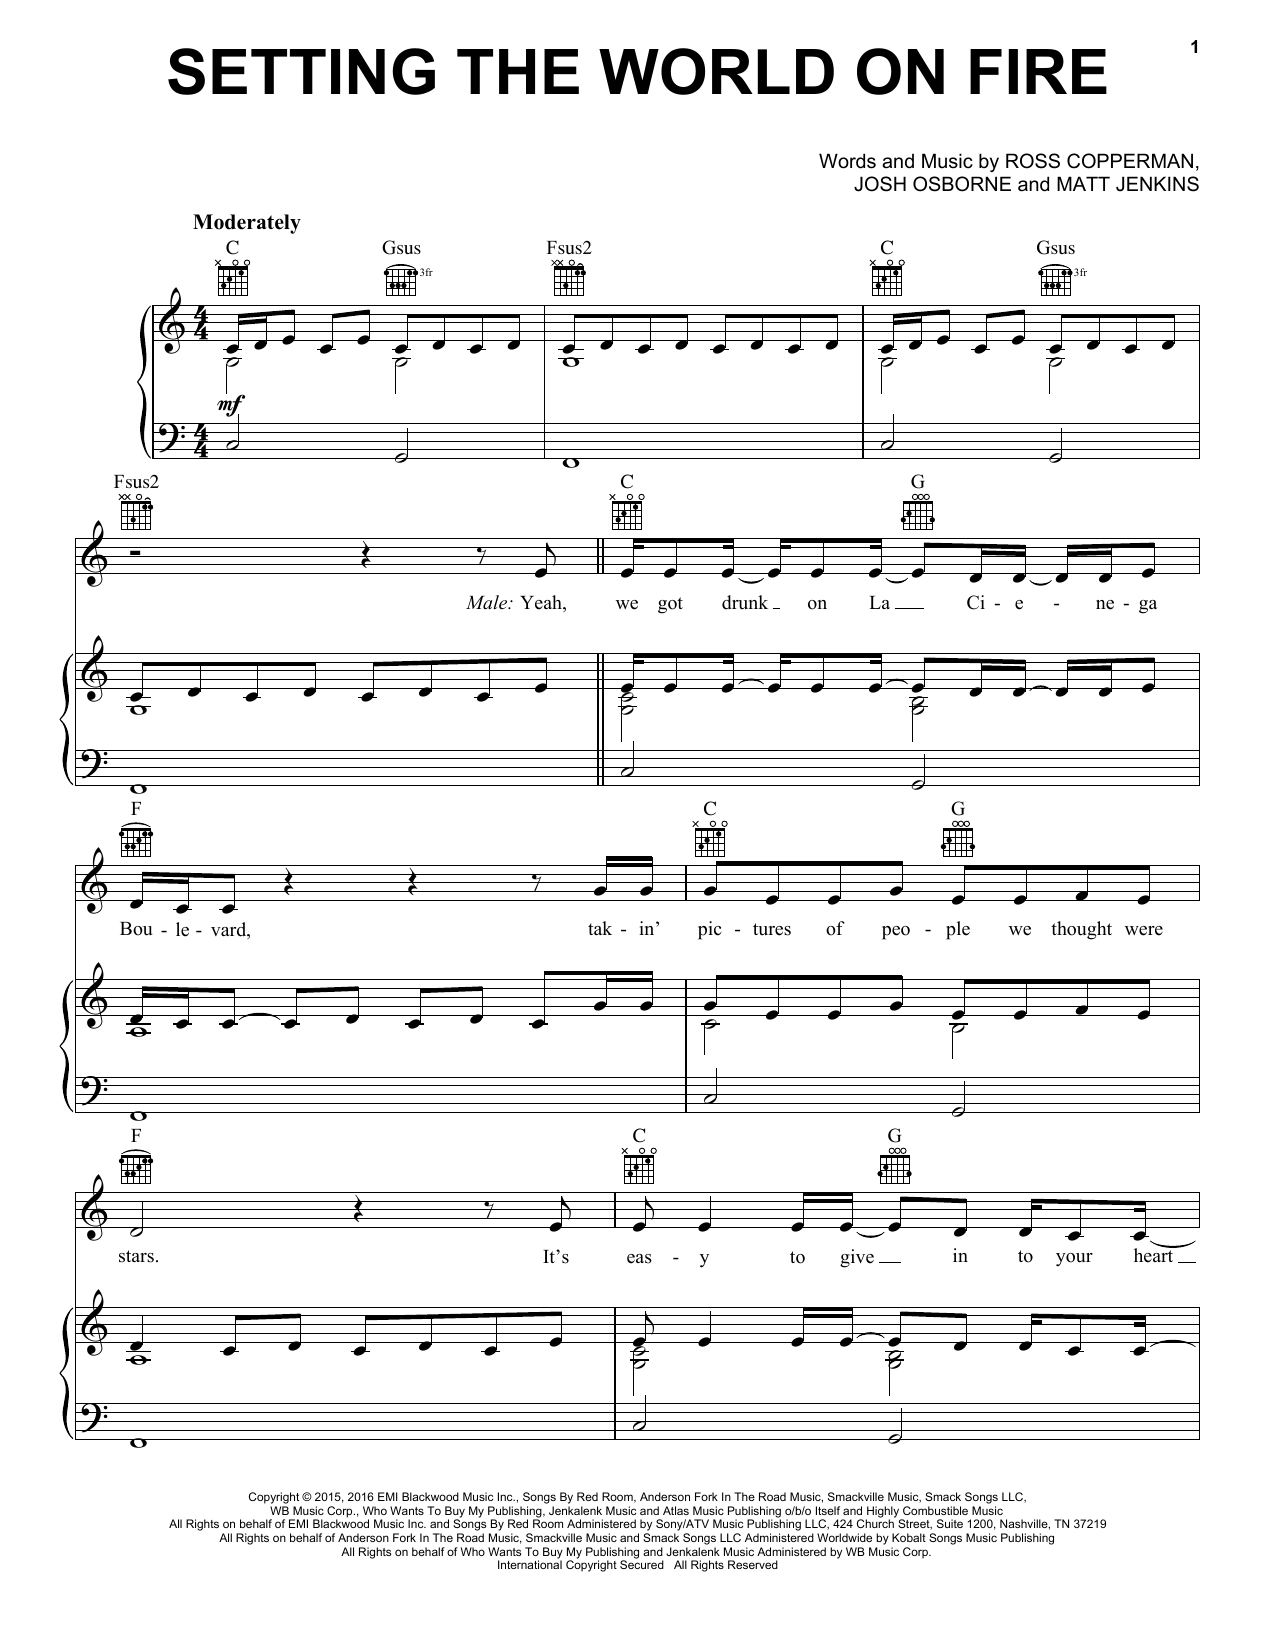 Download Kenny Chesney Setting The World On Fire (feat. Pink) Sheet Music